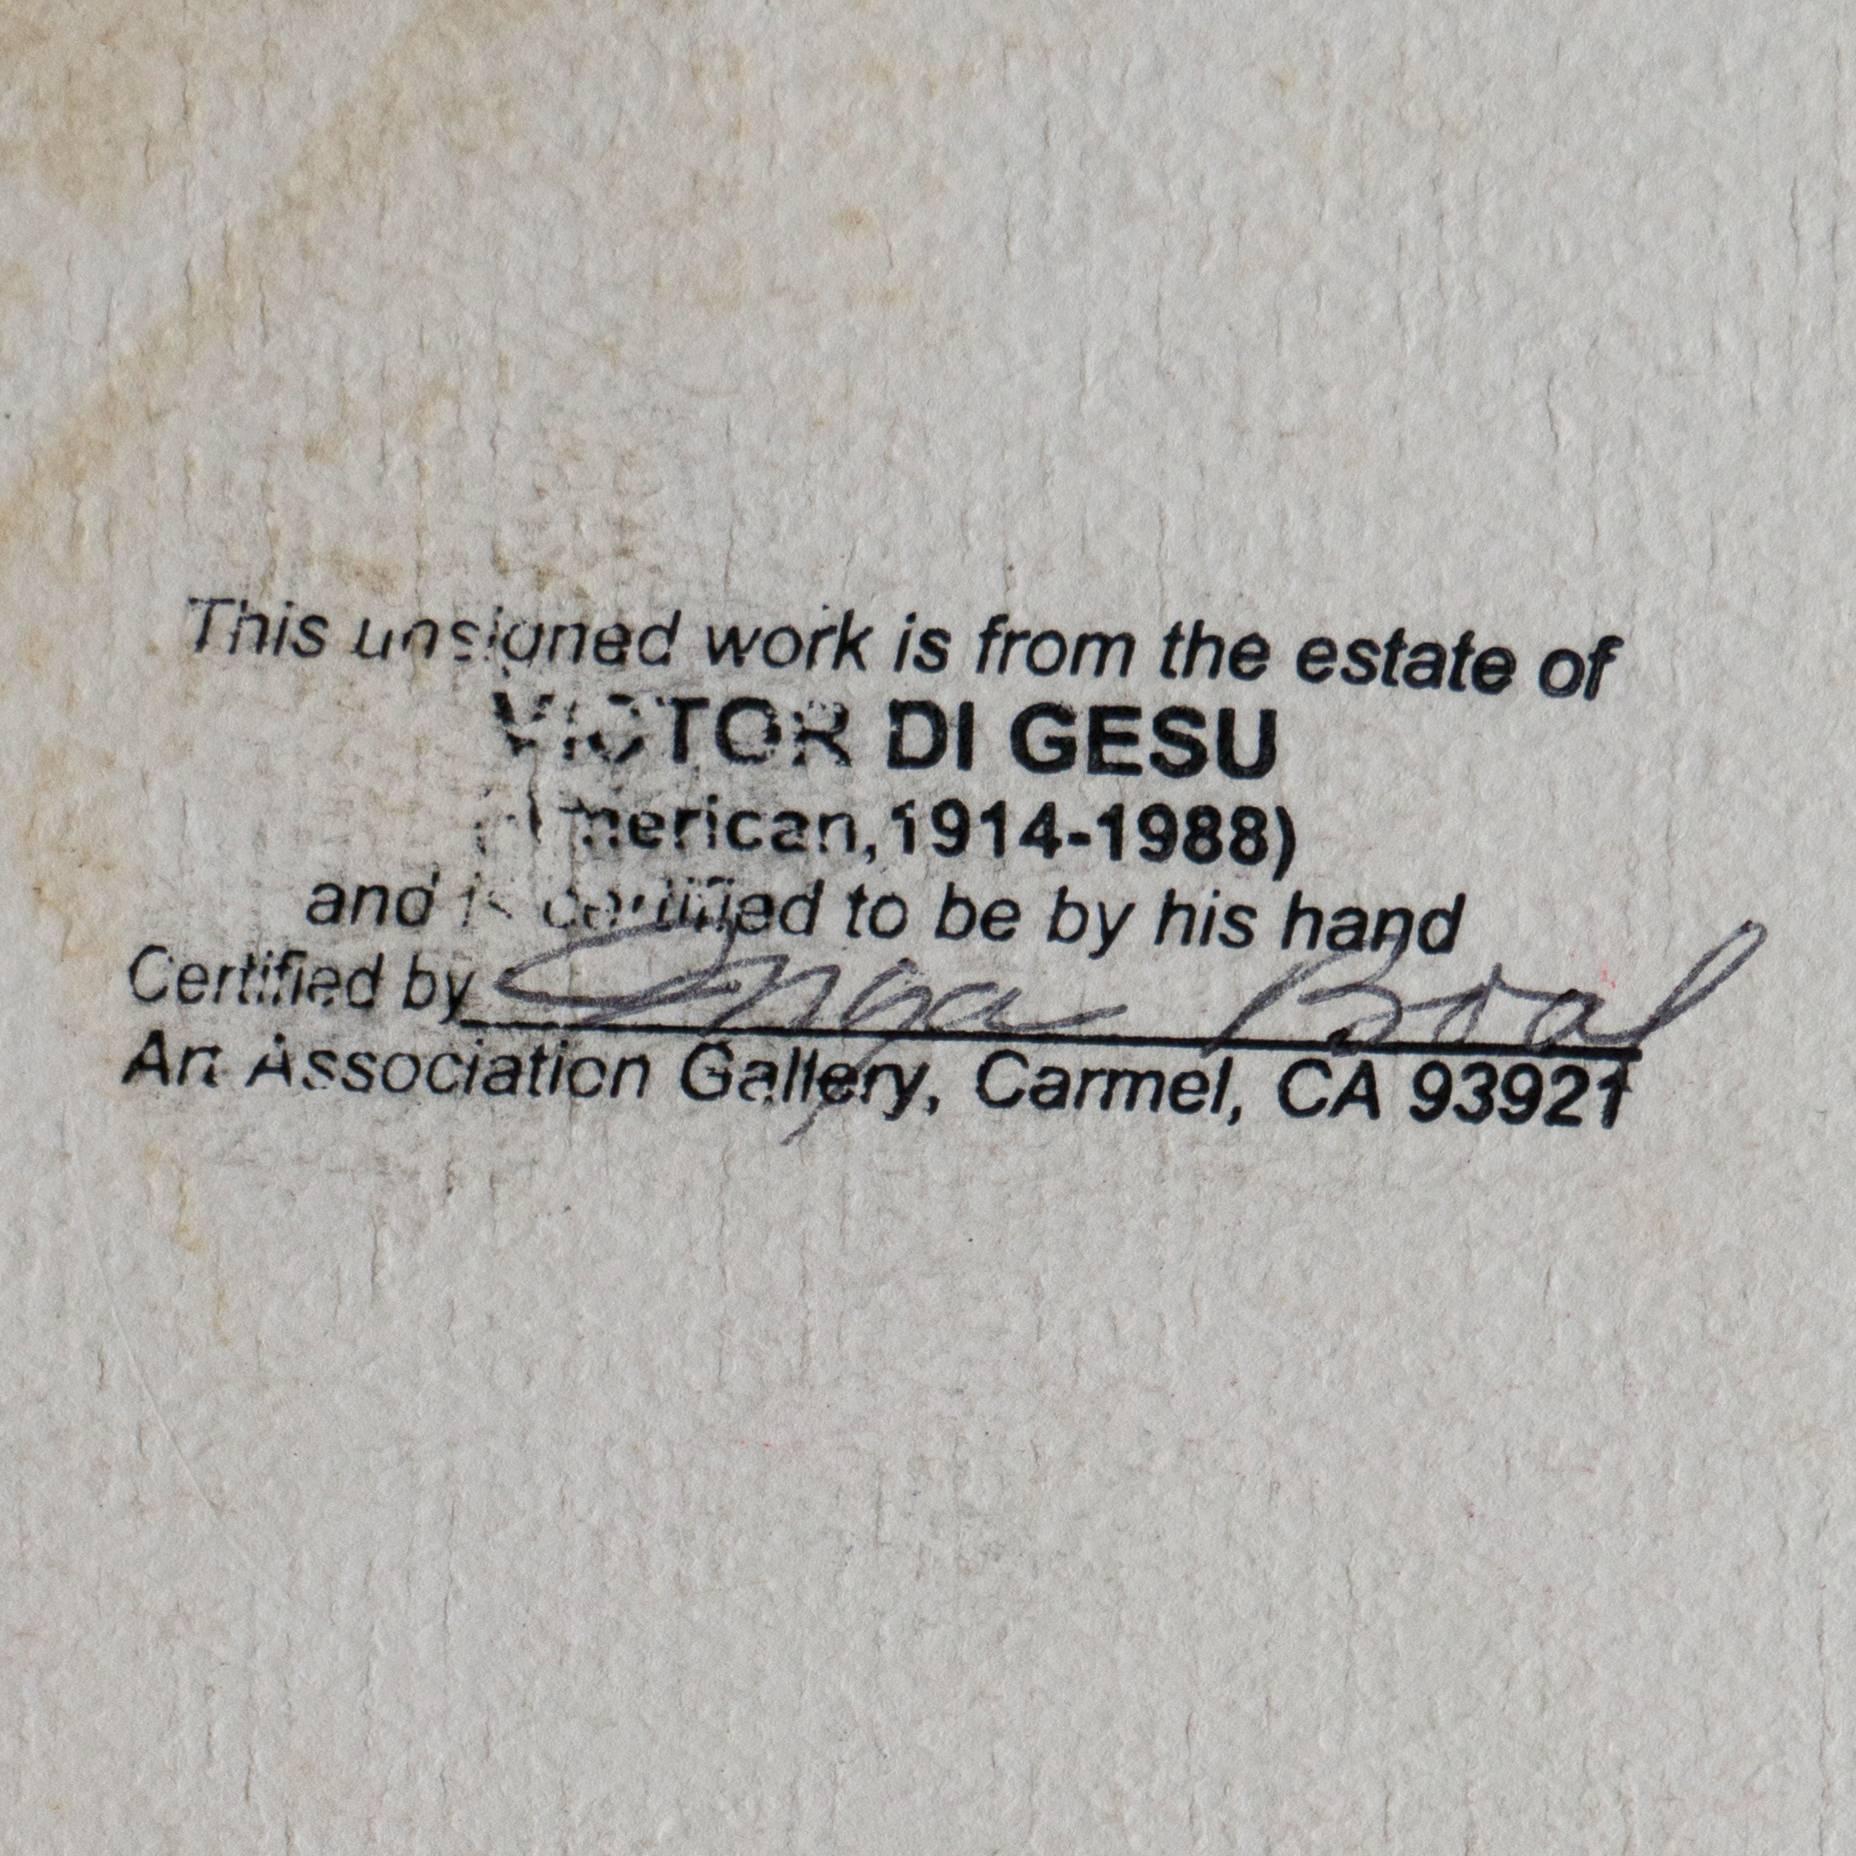 Painted circa 1955 and stamped verso with Victor Di Gesu Estate stamp.

Winner of the Prix Othon Friesz, Victor di Gesu first attended the Los Angeles Art Center and the Chouinard Art School before moving to Paris where he studied with Andre L’Hote